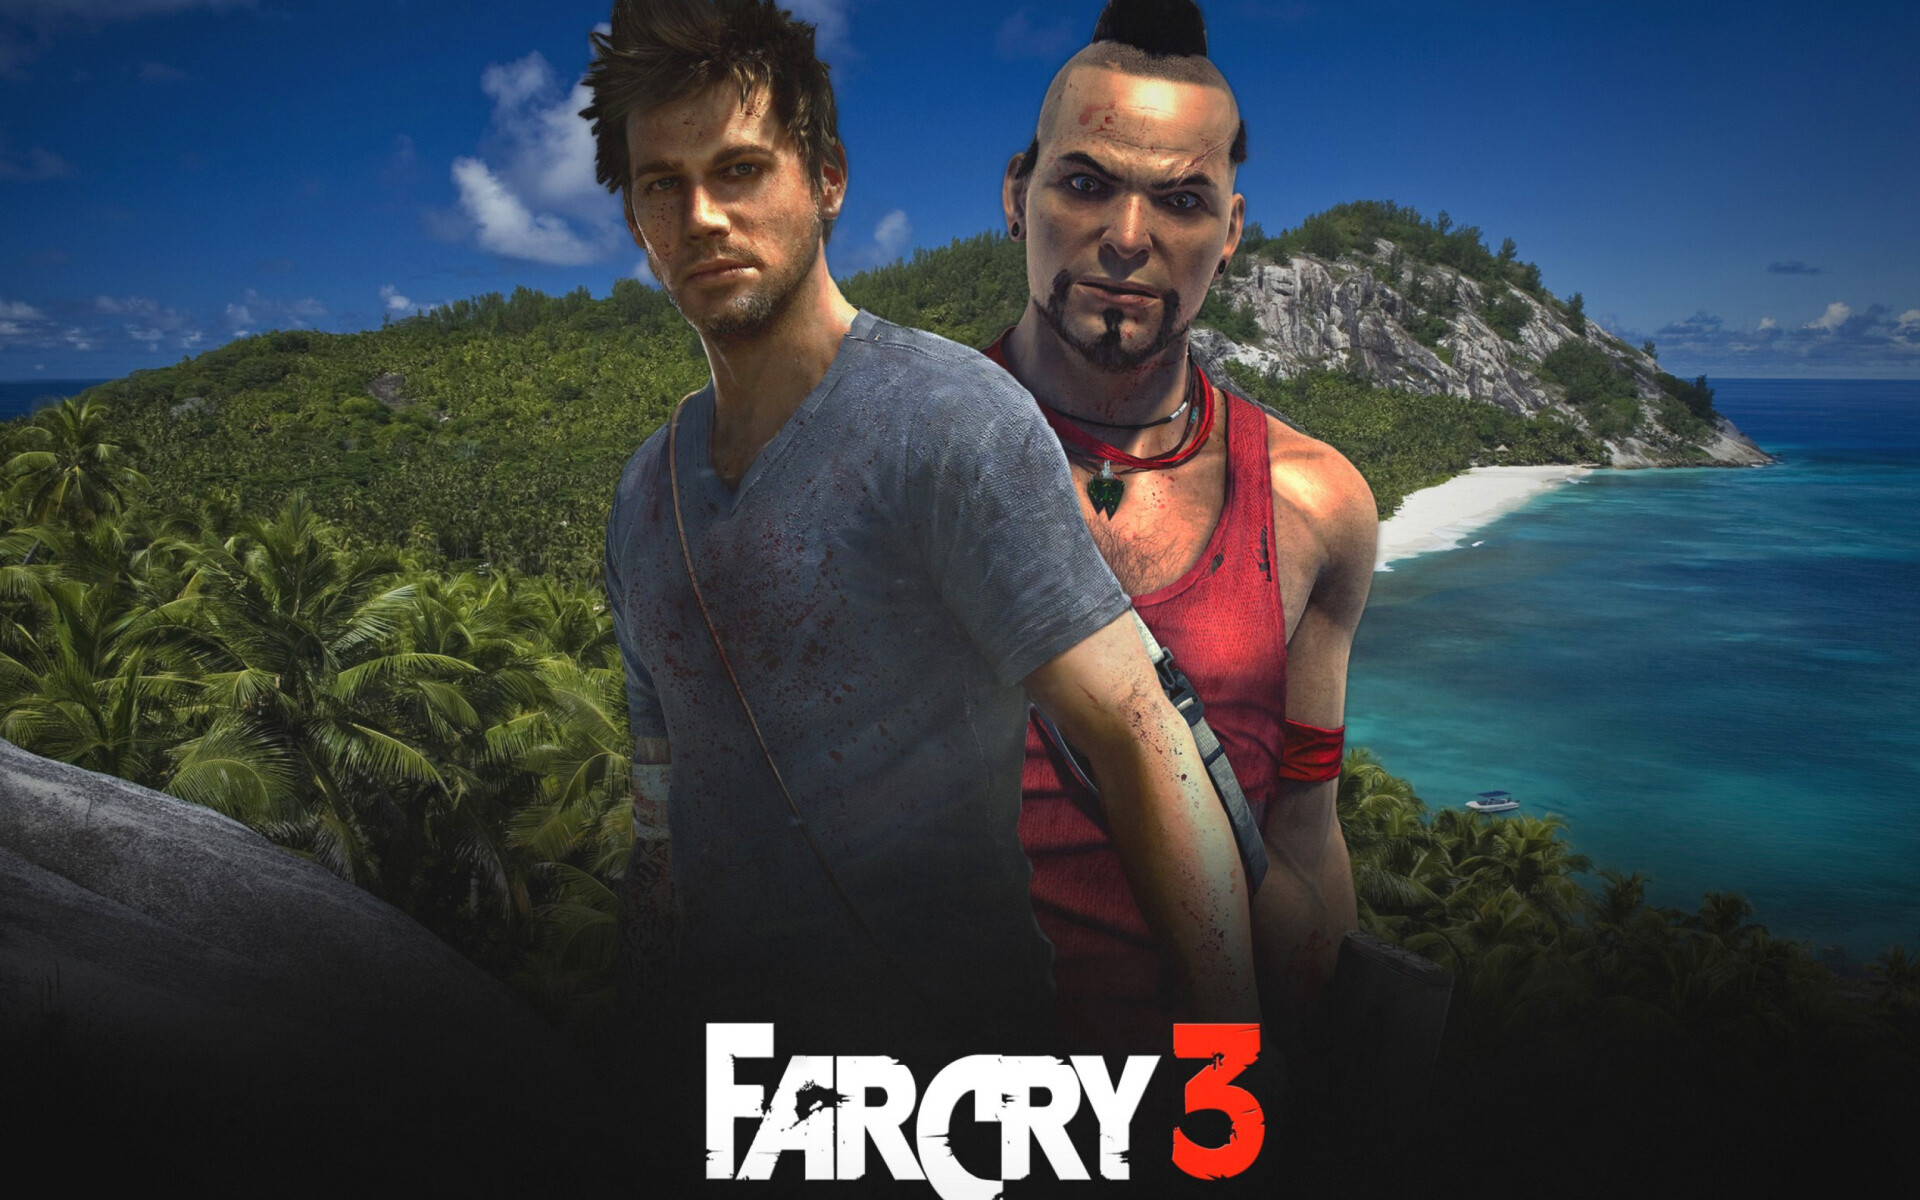 Far Cry 3: Jason Brody is on vacation with a group of friends in Bangkok, Thailand, Game plot. 1920x1200 HD Wallpaper.